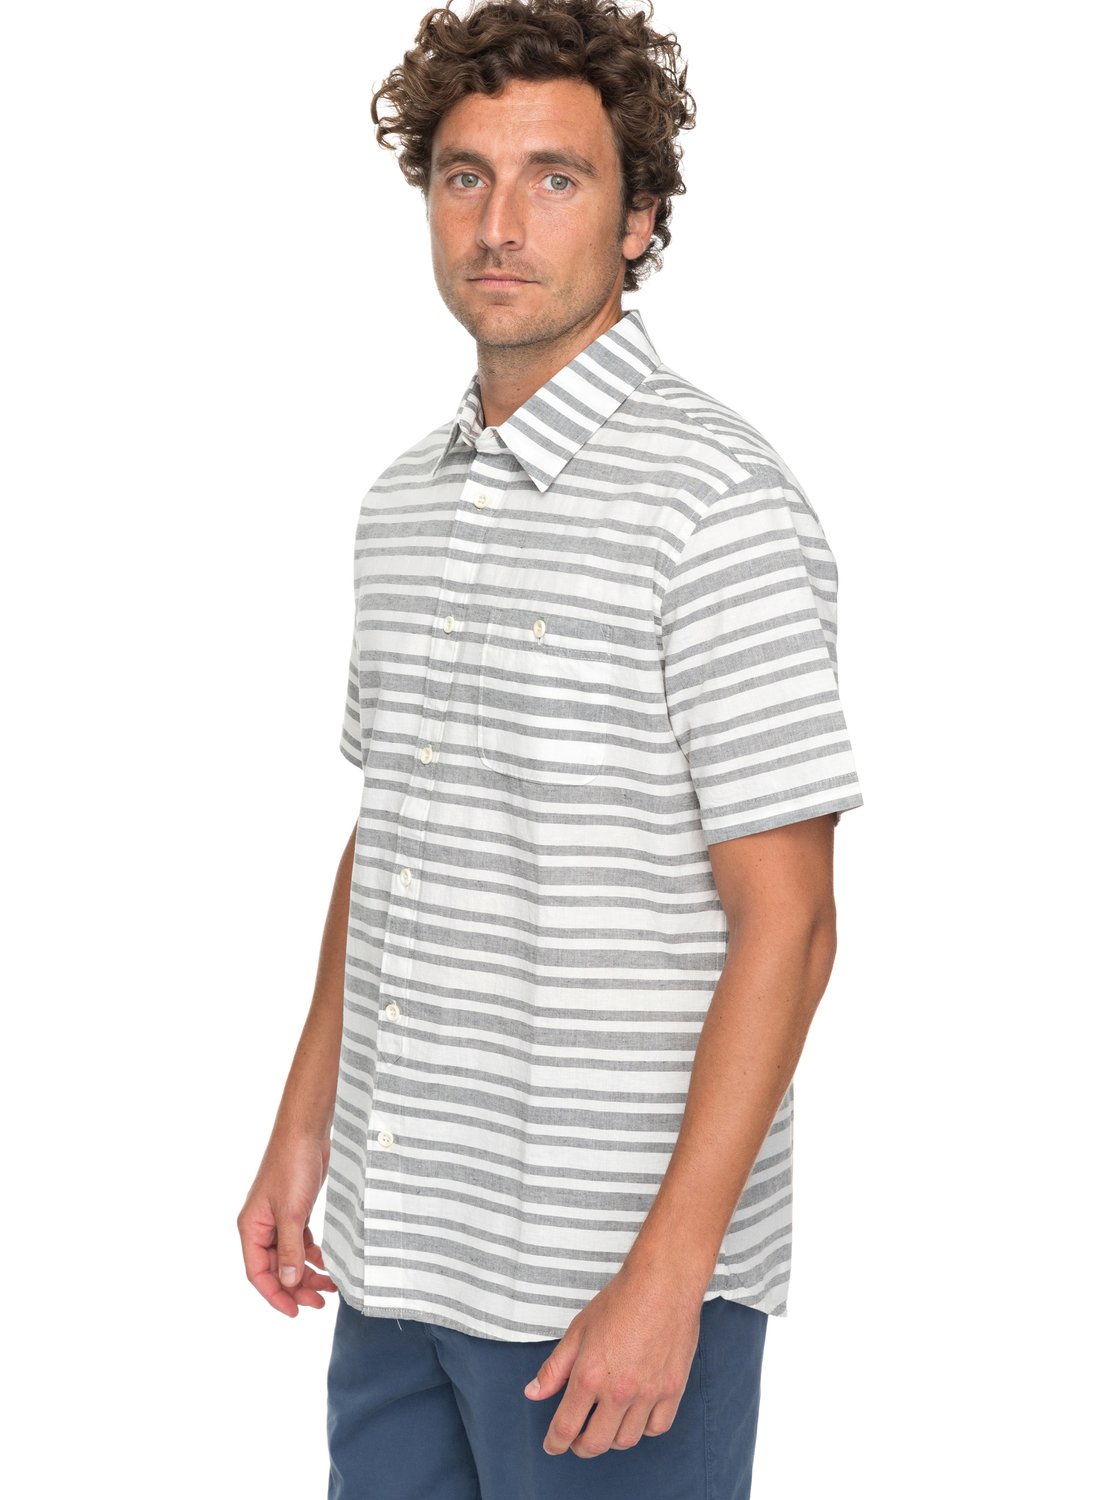 Waterman Flying First - Chemise a manches courtes pour Homme - Quiksilver